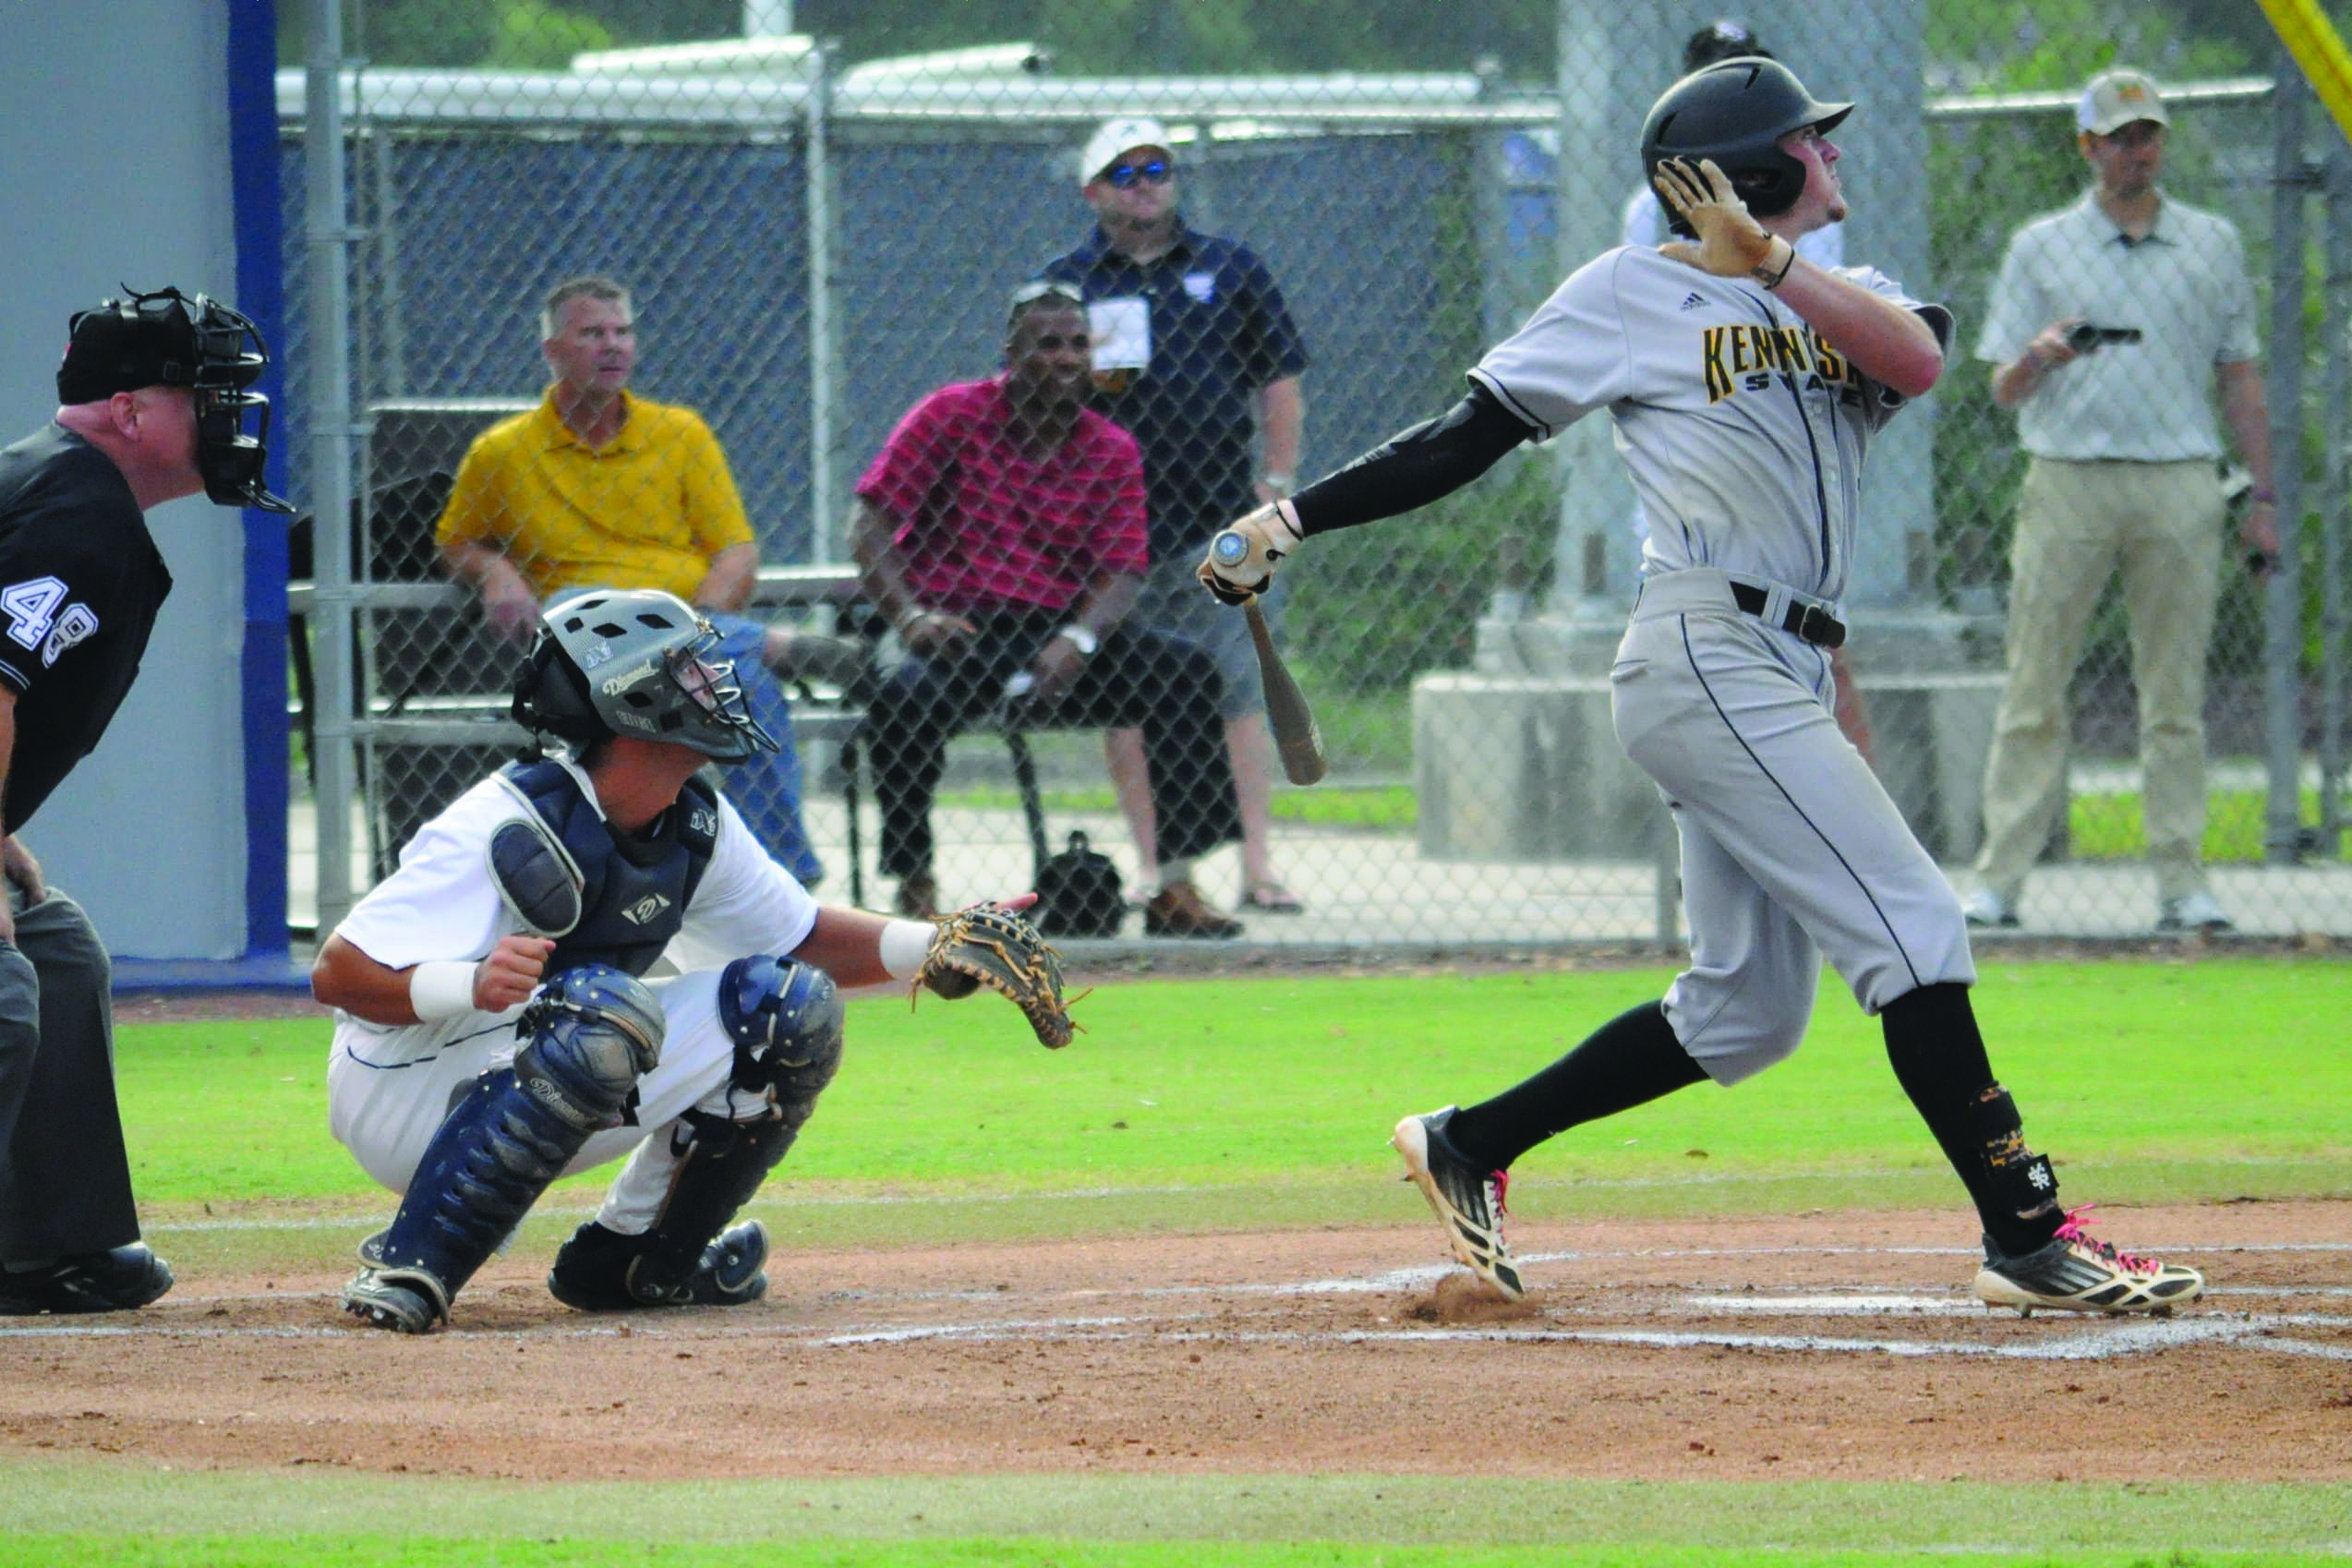 The Ospreys dropped two of three games in their A-Sun opener against Kennesaw. Photo by Morgan Purvis